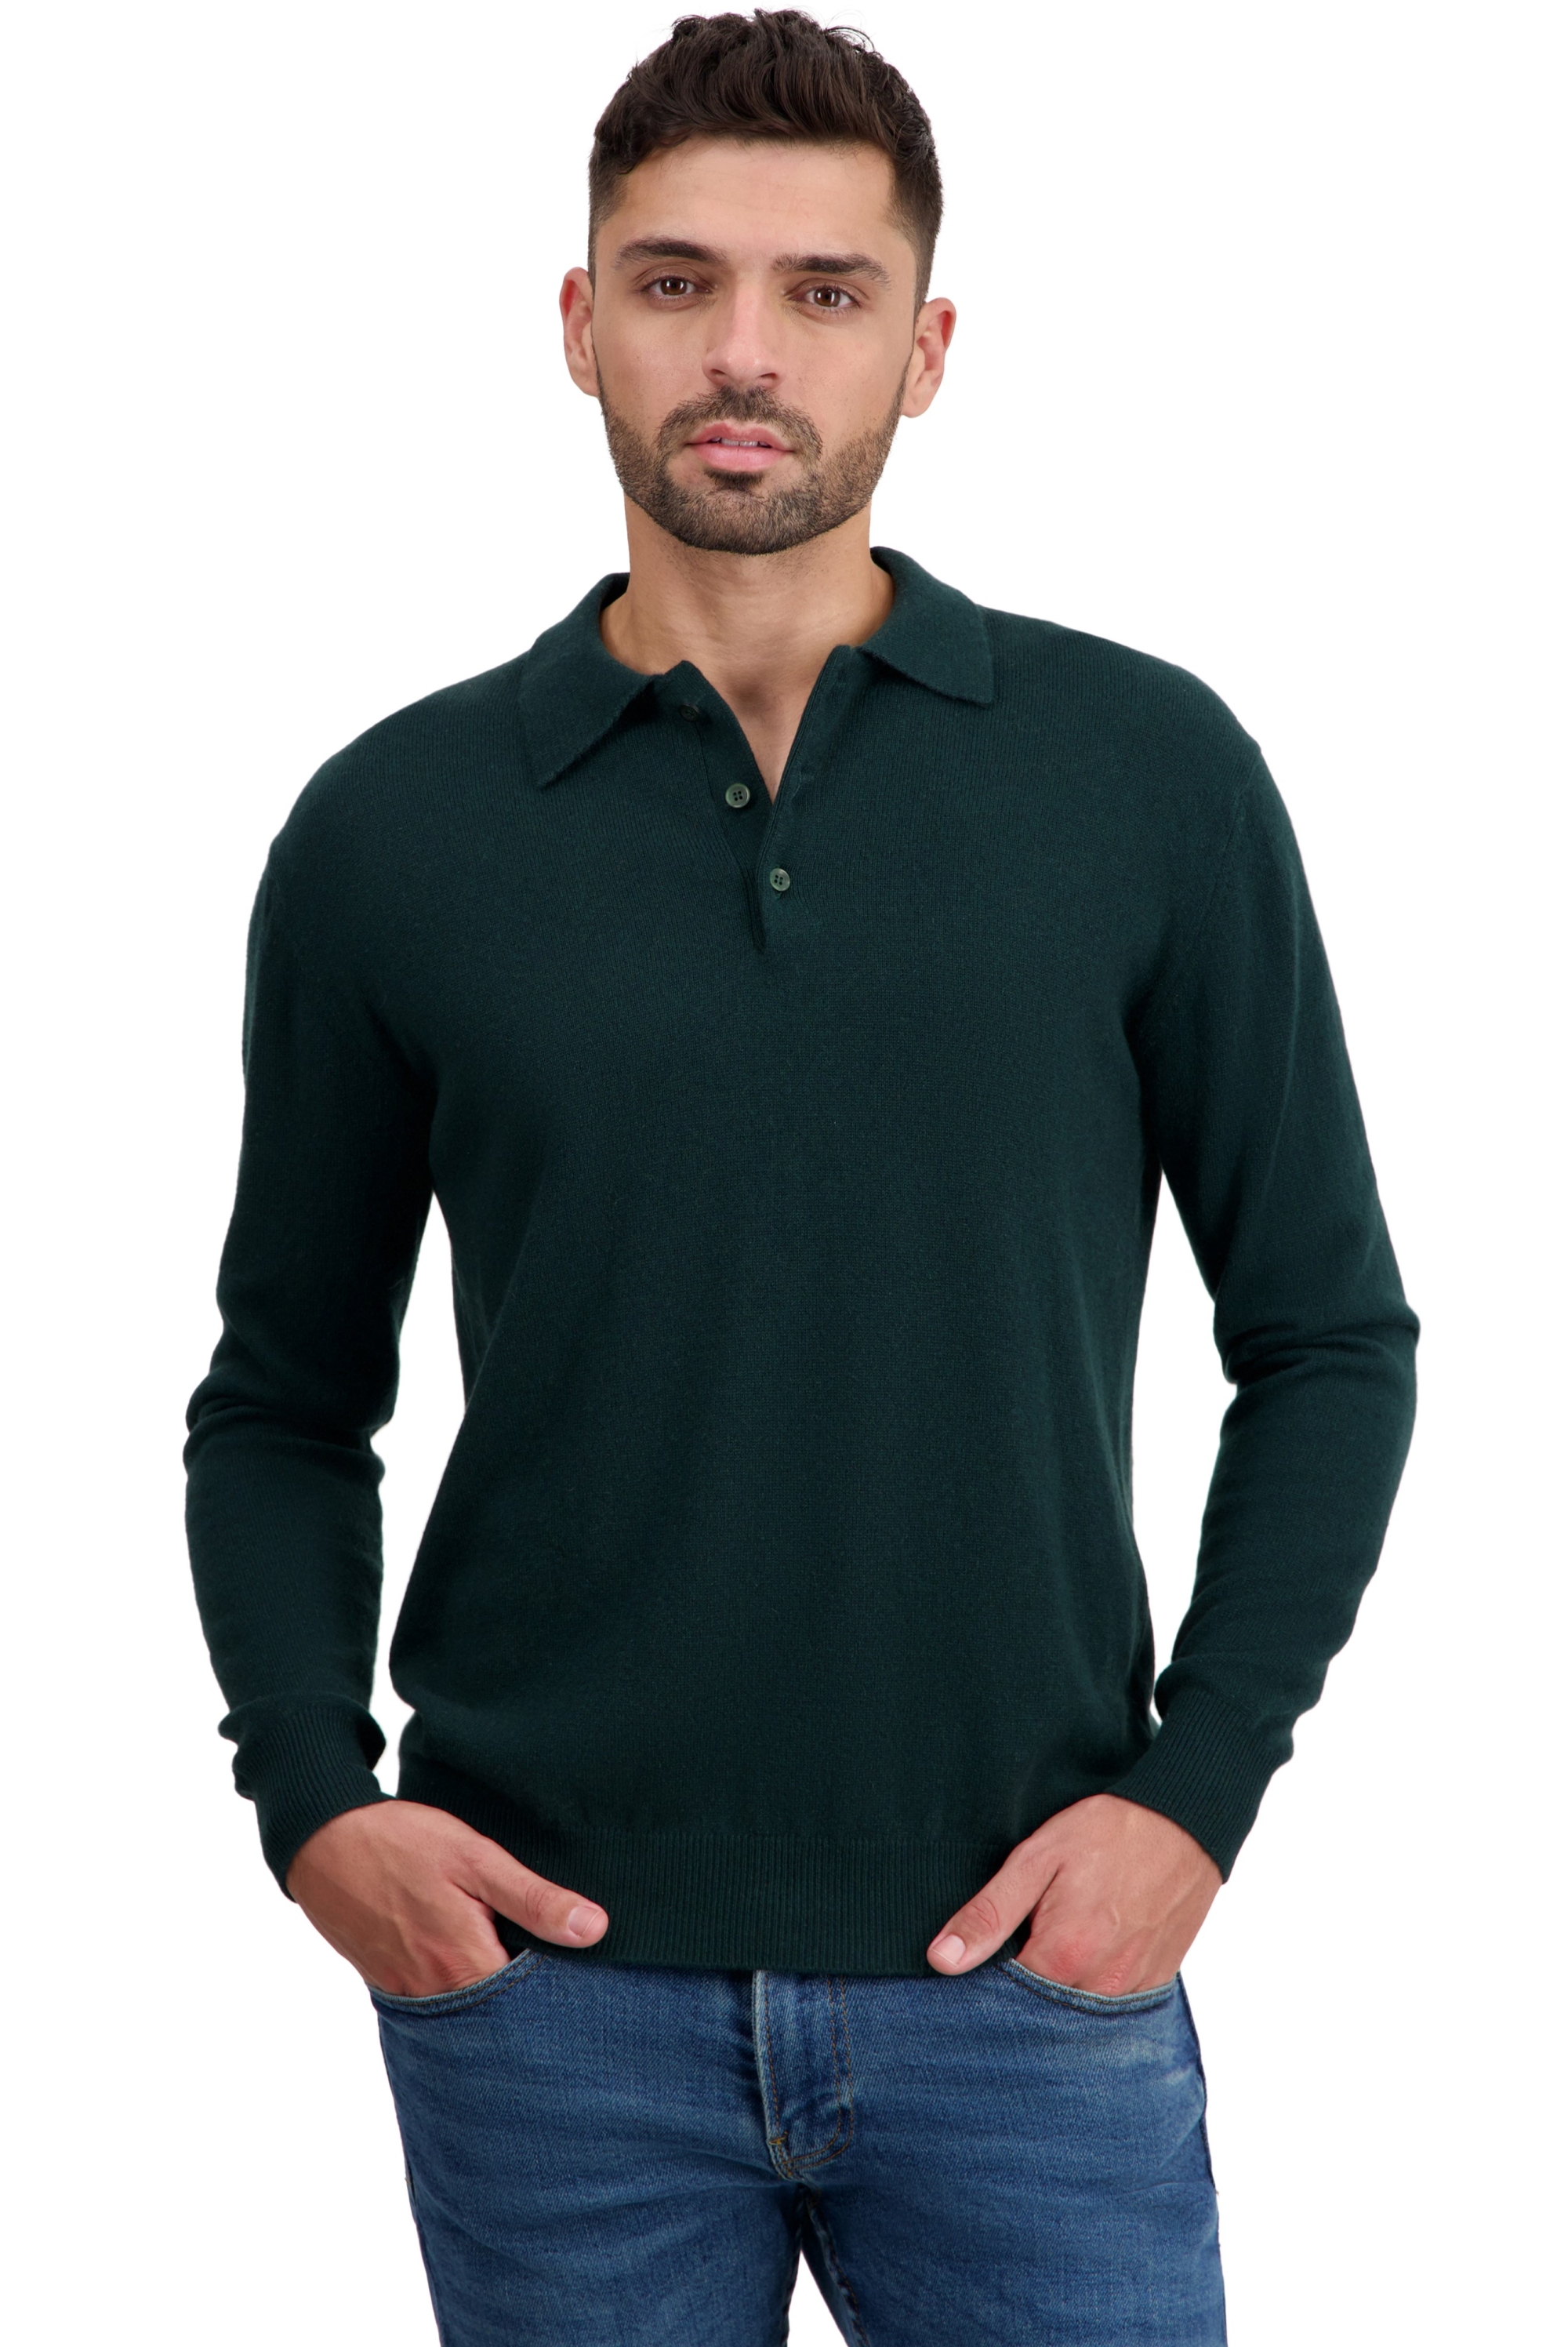 Cashmere men basic sweaters at low prices tarn first bottle 2xl